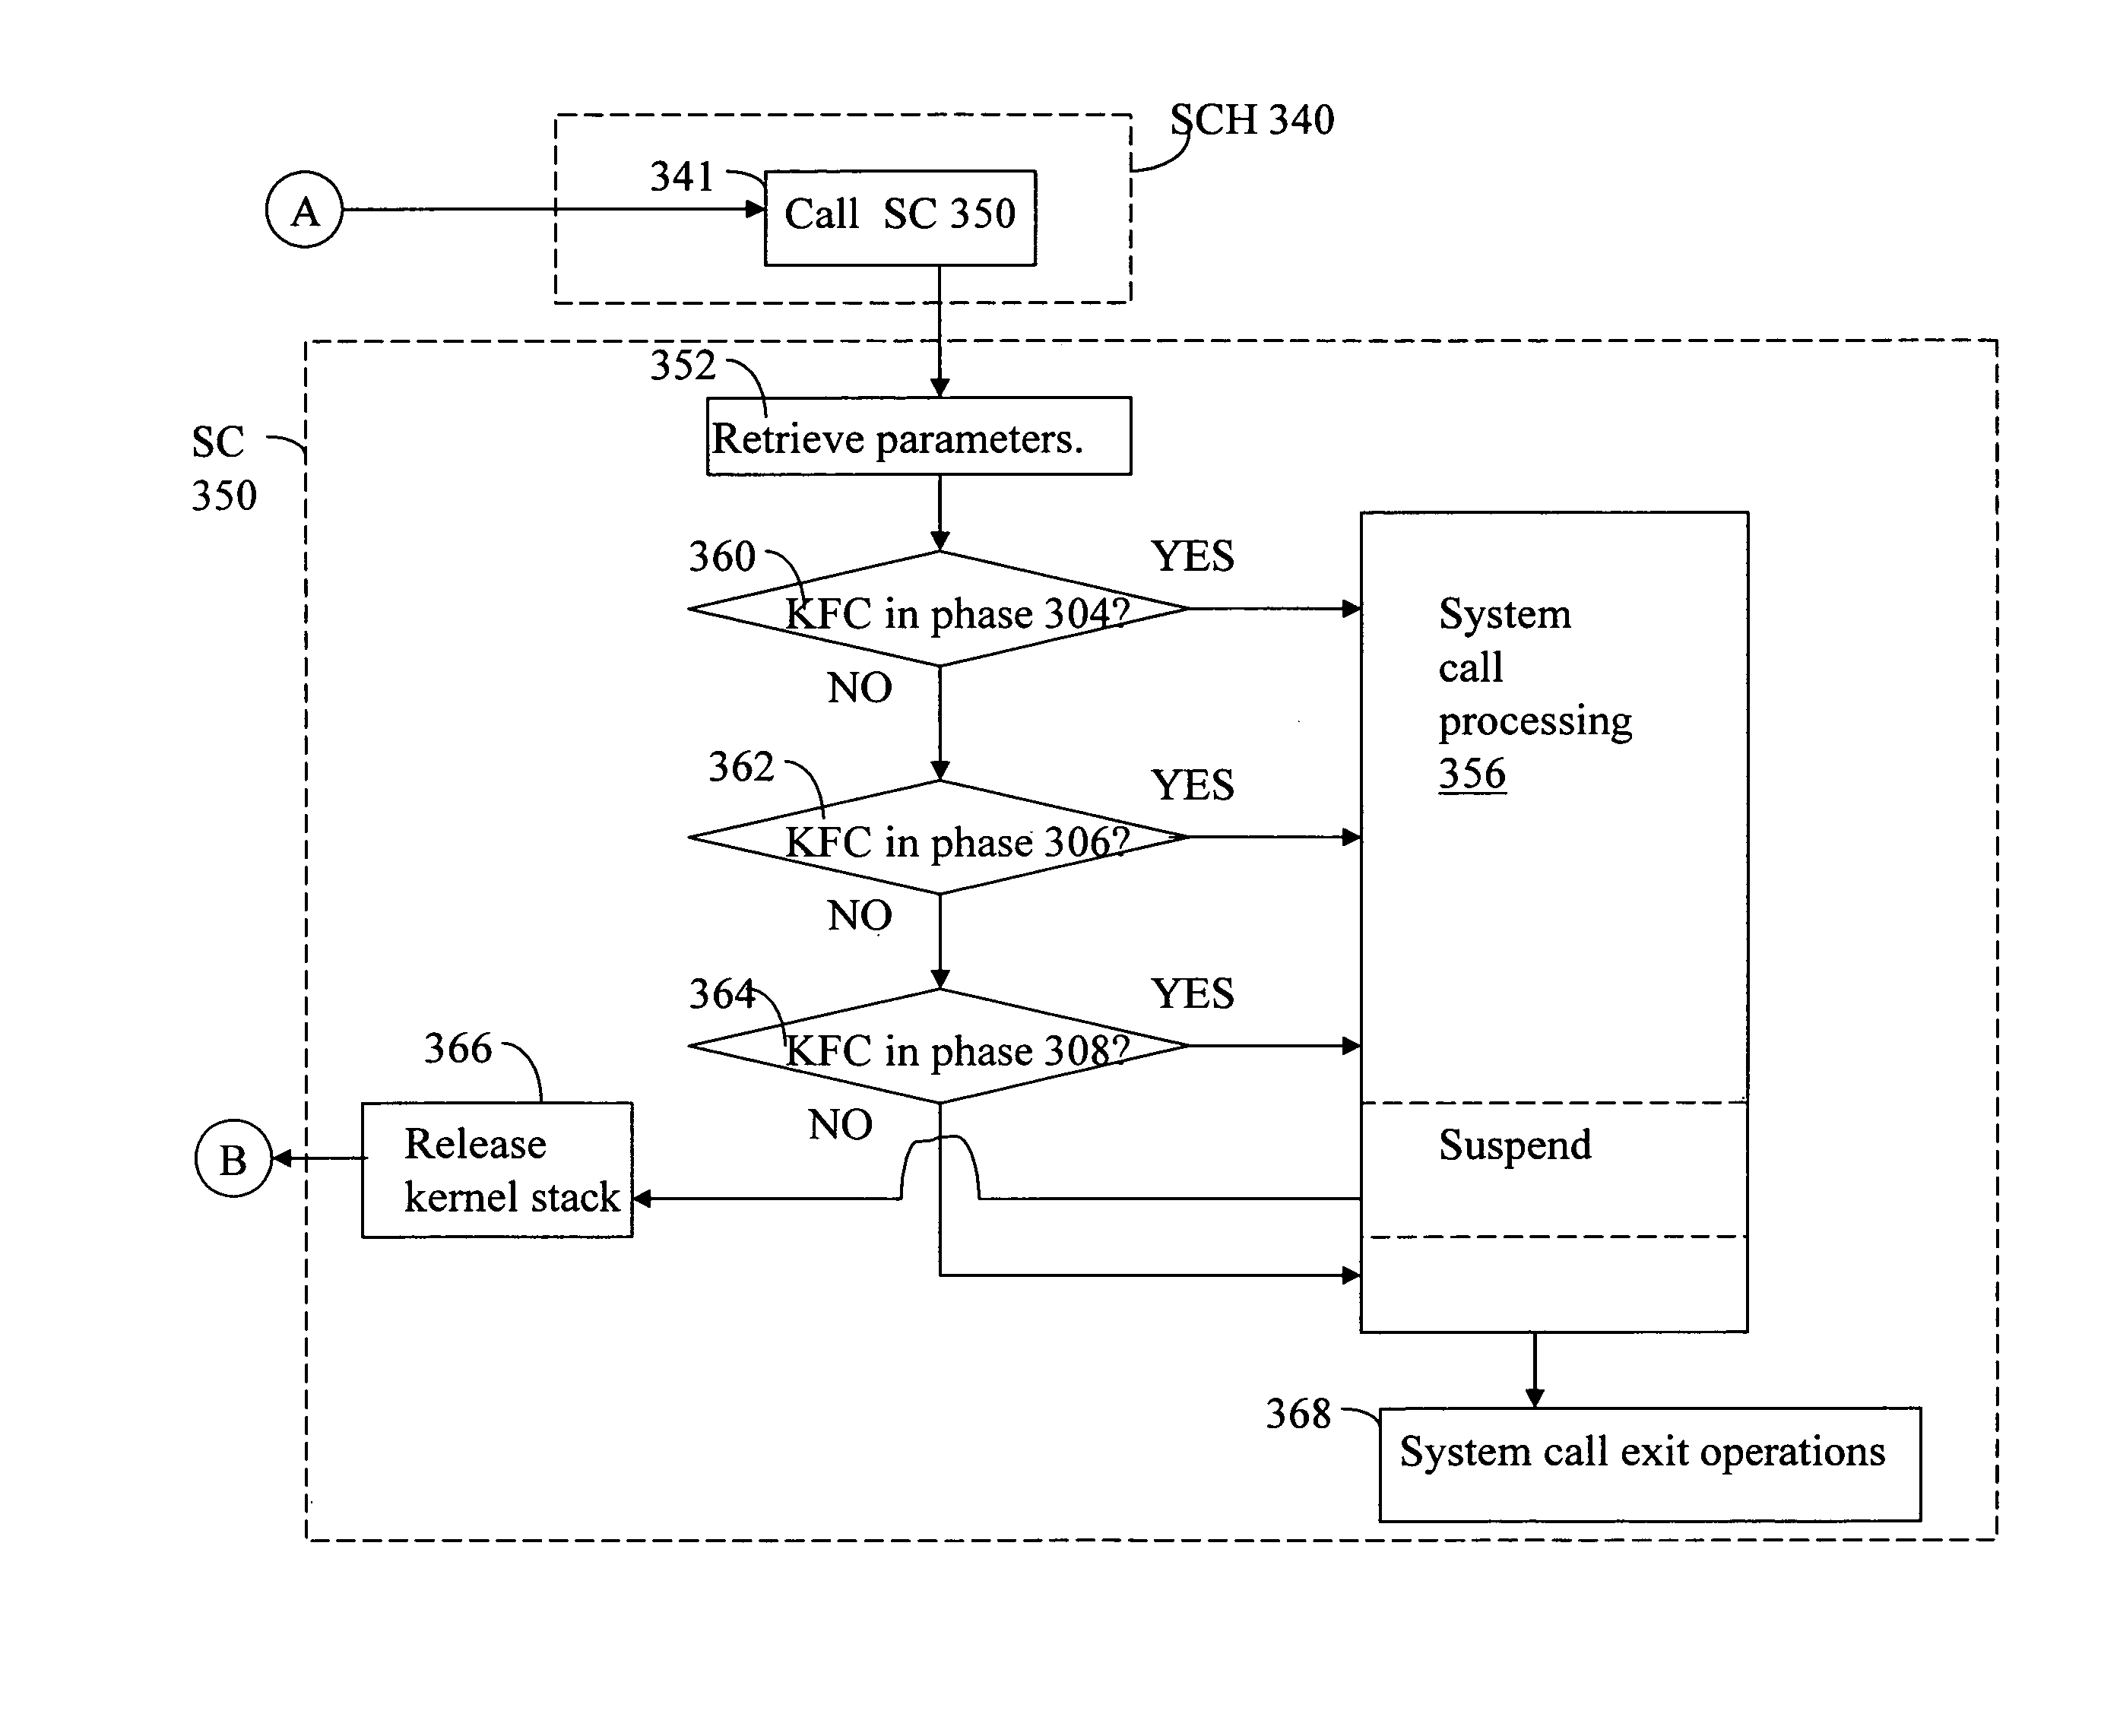 Method for promotion and demotion between system calls and fast kernel calls